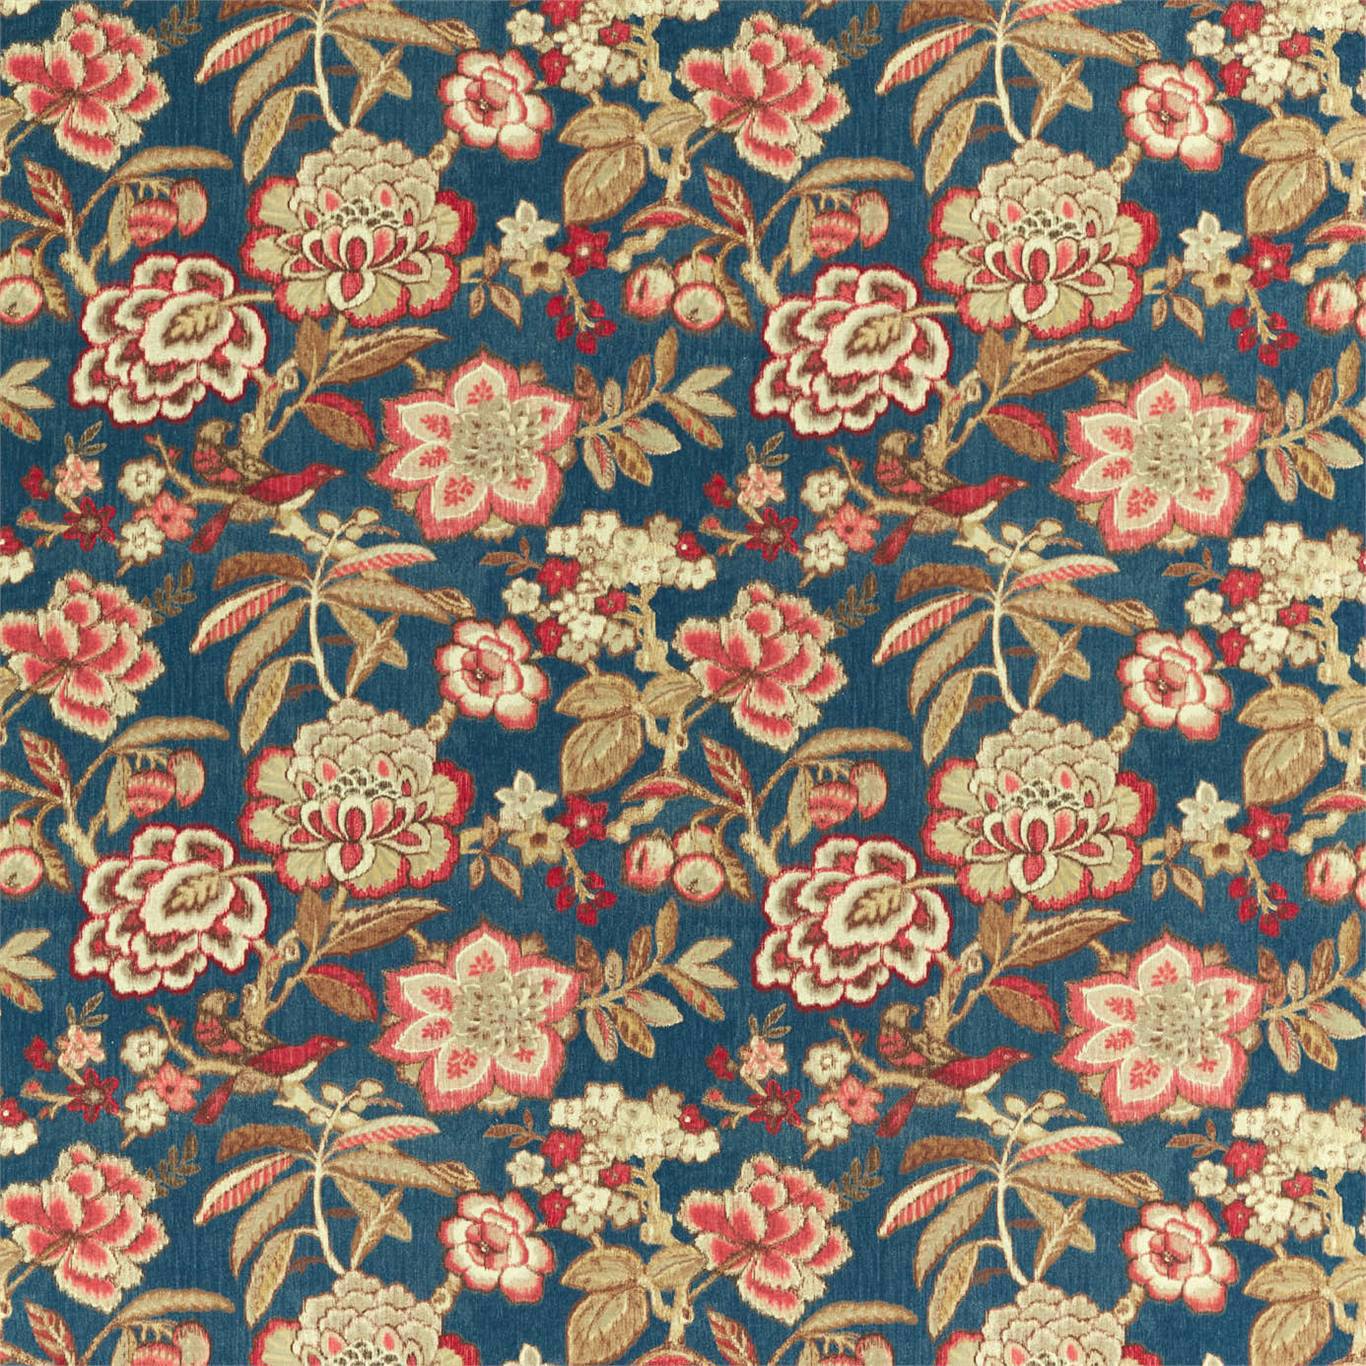 Indra Flower Fabric by Sanderson